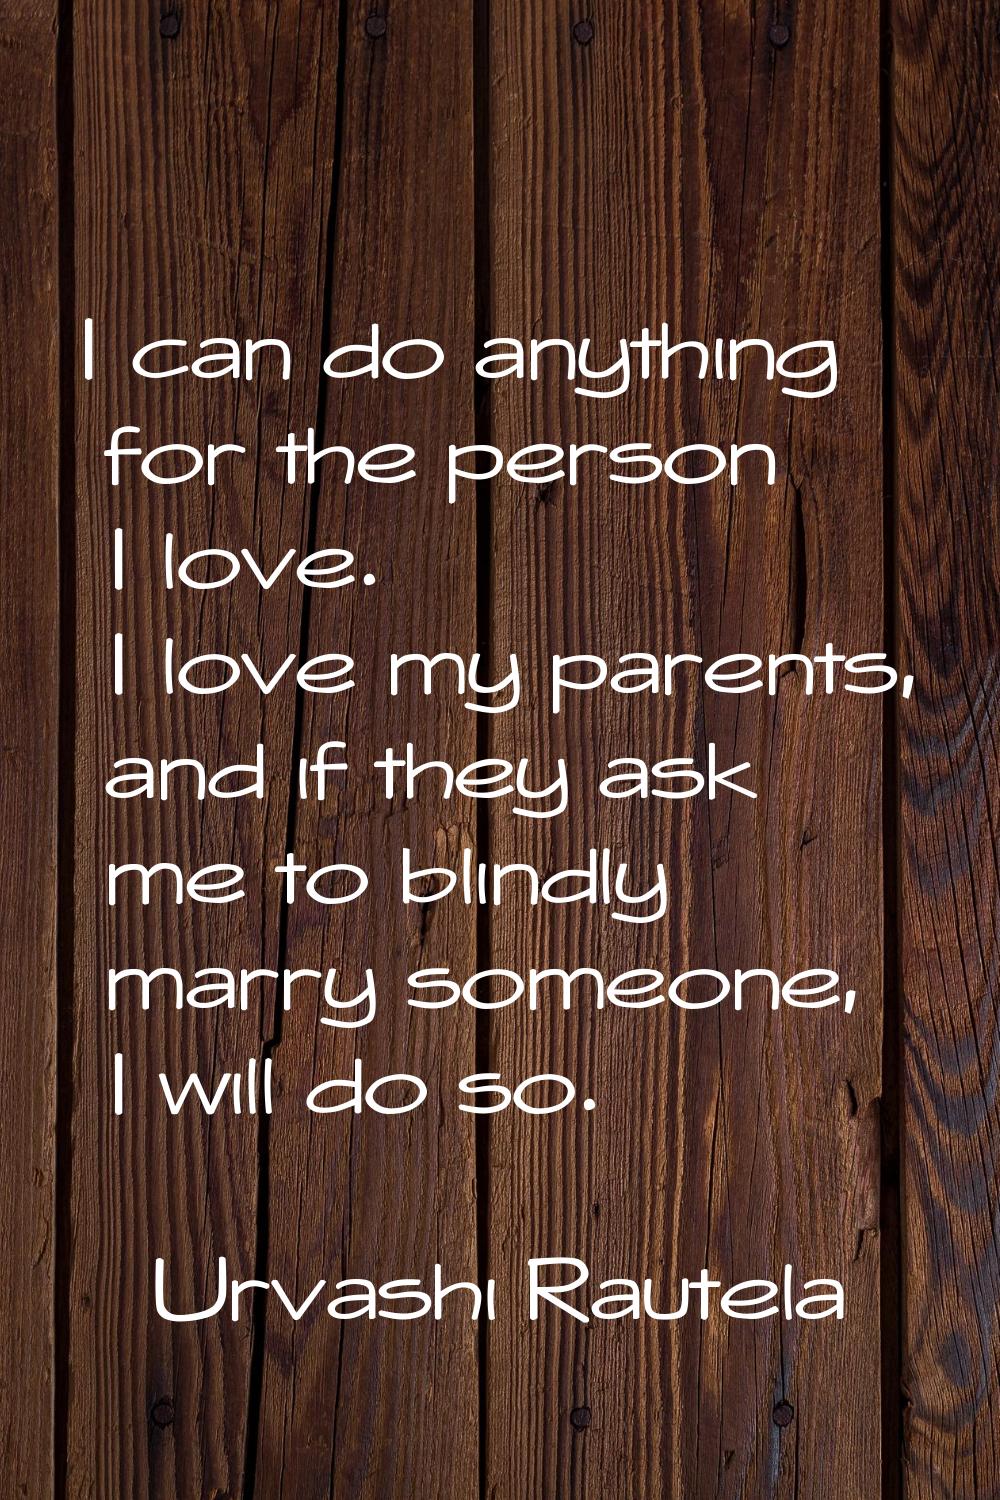 I can do anything for the person I love. I love my parents, and if they ask me to blindly marry som